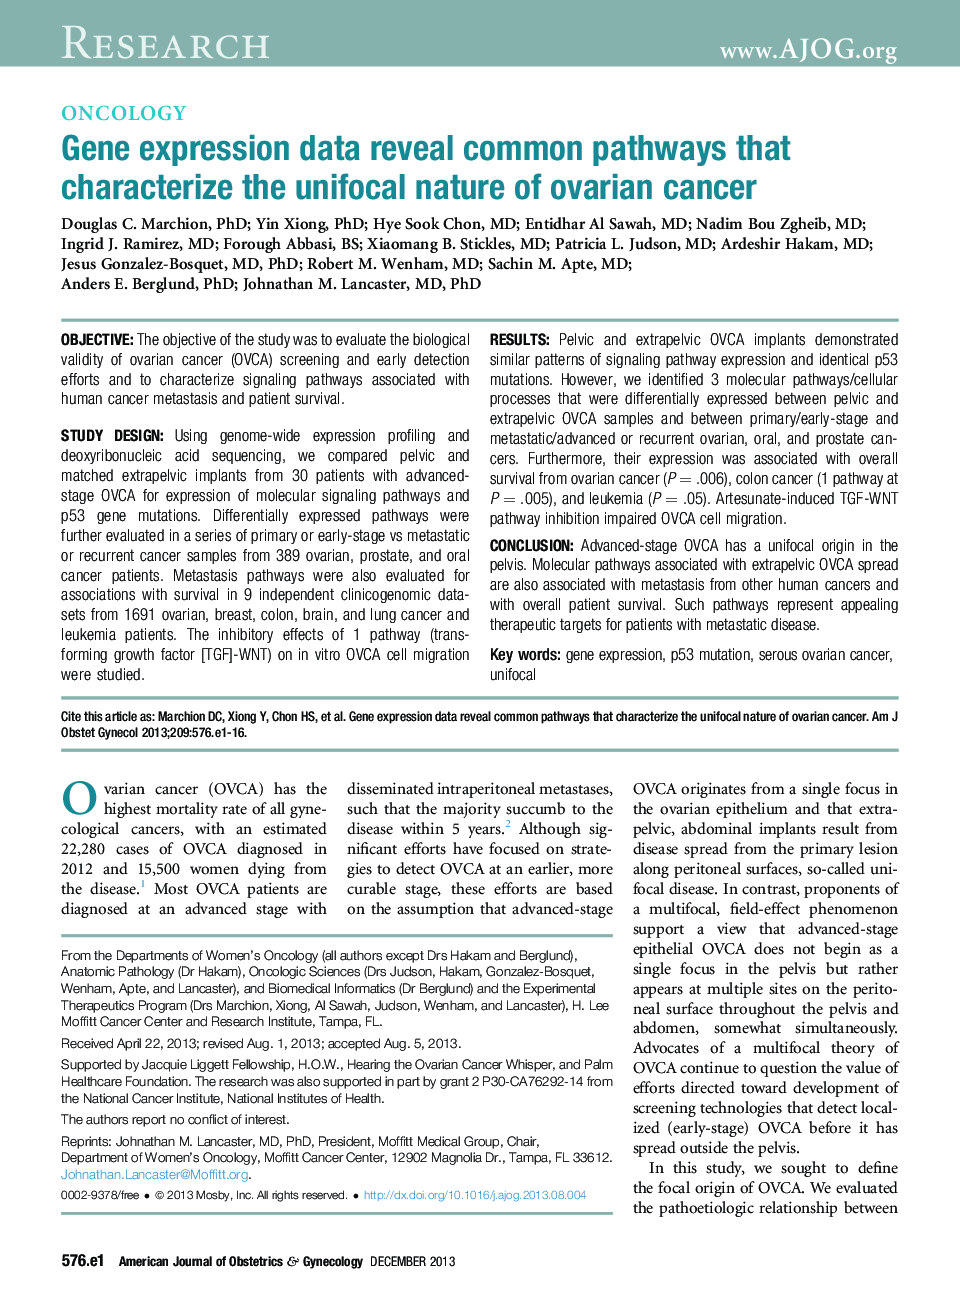 Gene expression data reveal common pathways that characterize the unifocal nature of ovarian cancer